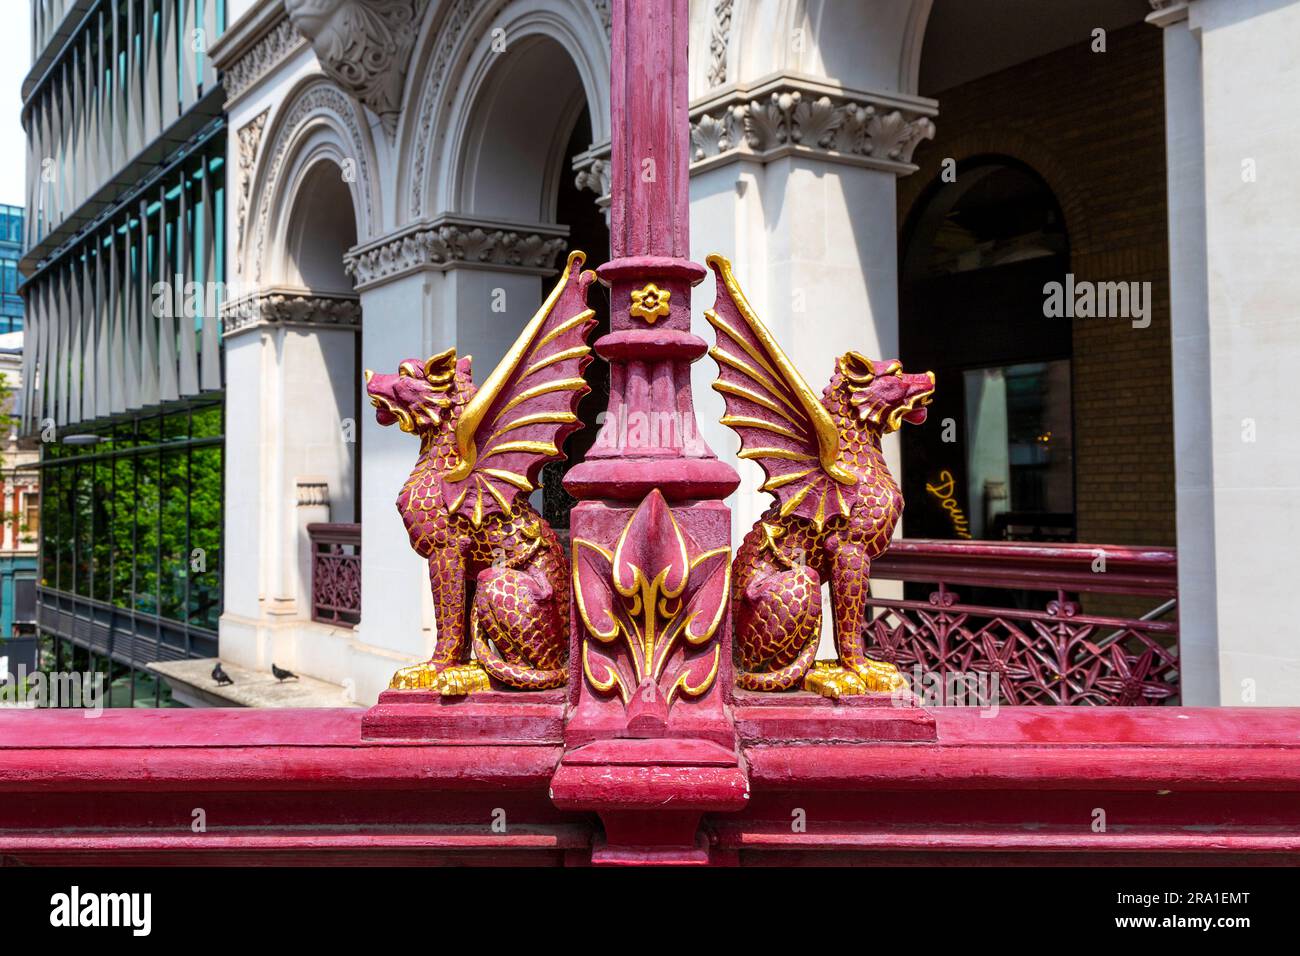 Red and gold dragons guarding a street lamp on the Holborn Viaduct, London, England, UK Stock Photo